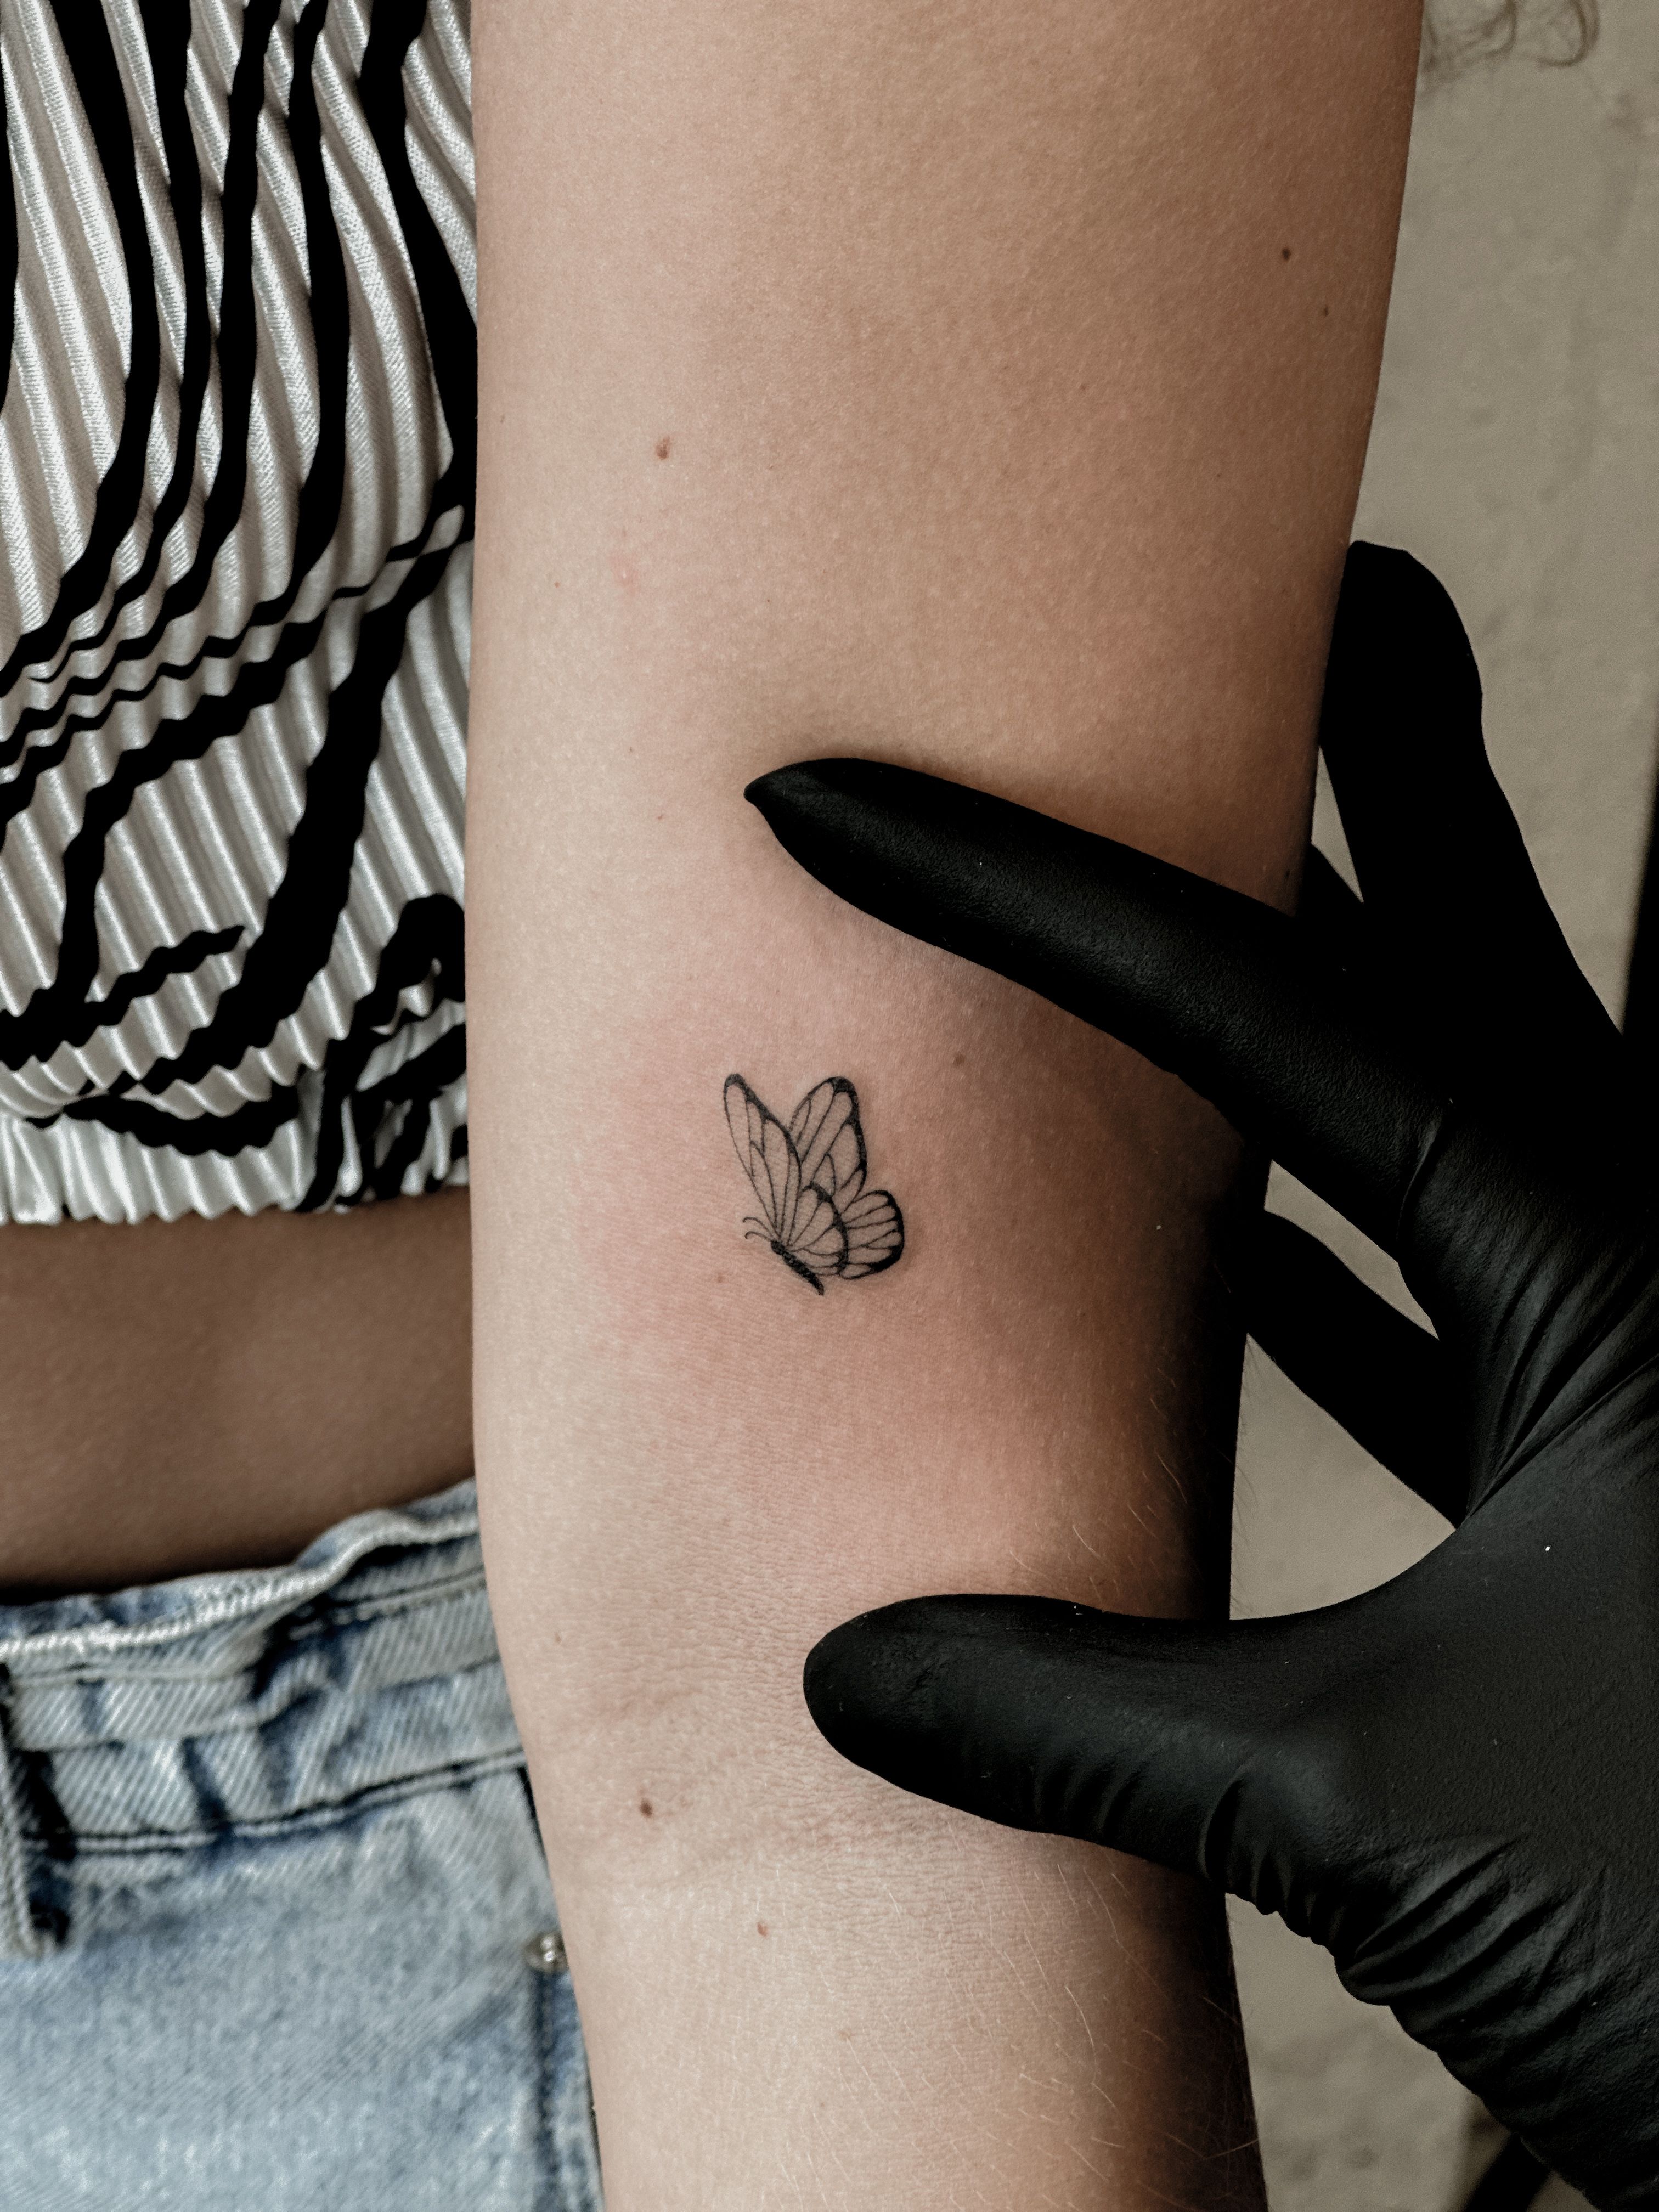 10 Dainty Wrist Tattoos If You Want A Subtle, Minimalist Ink | Preview.ph